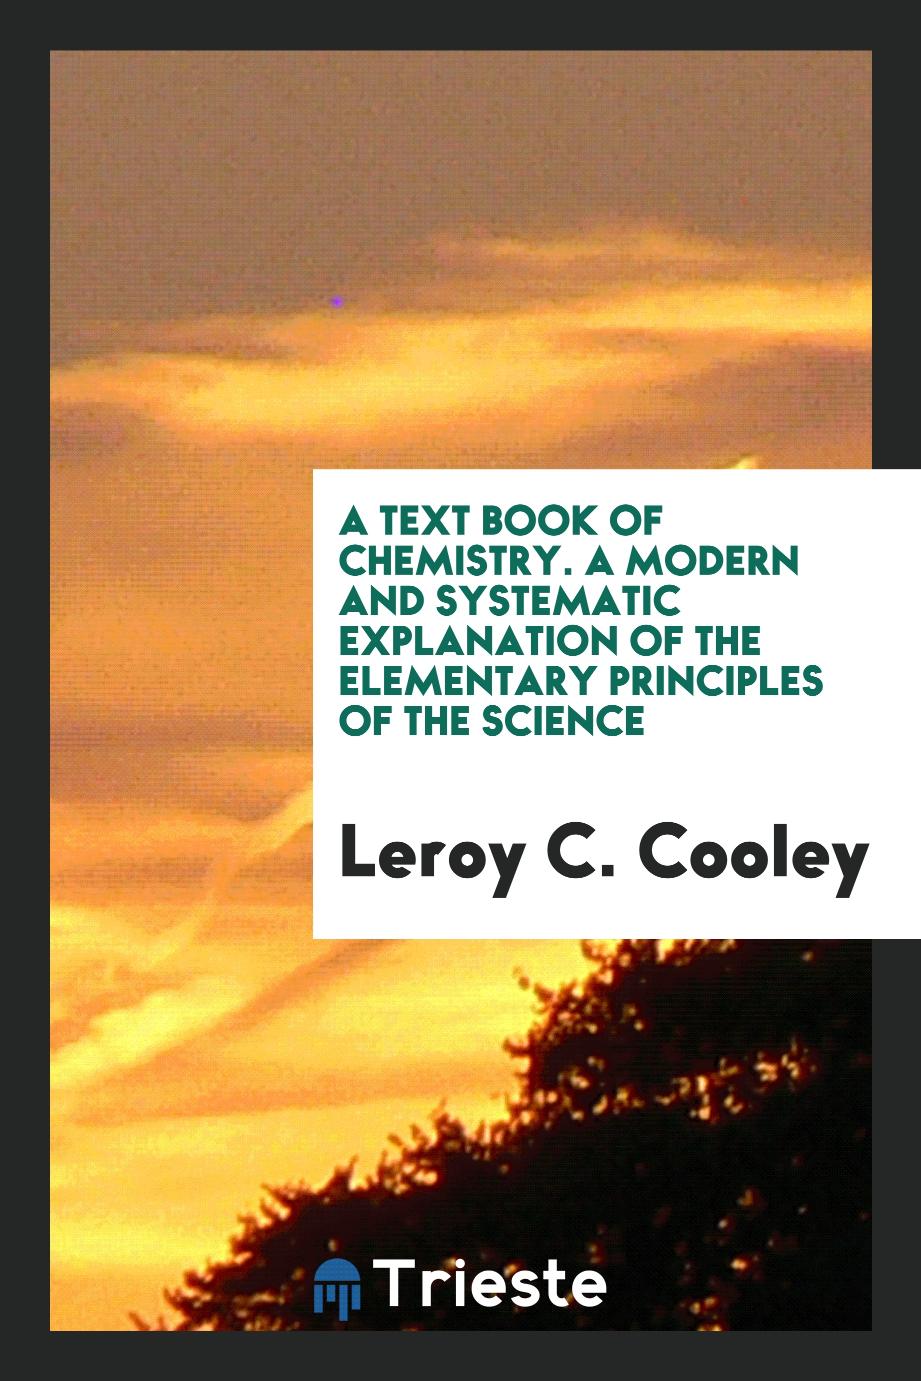 A Text Book of Chemistry. A Modern and Systematic Explanation of the Elementary Principles of the Science